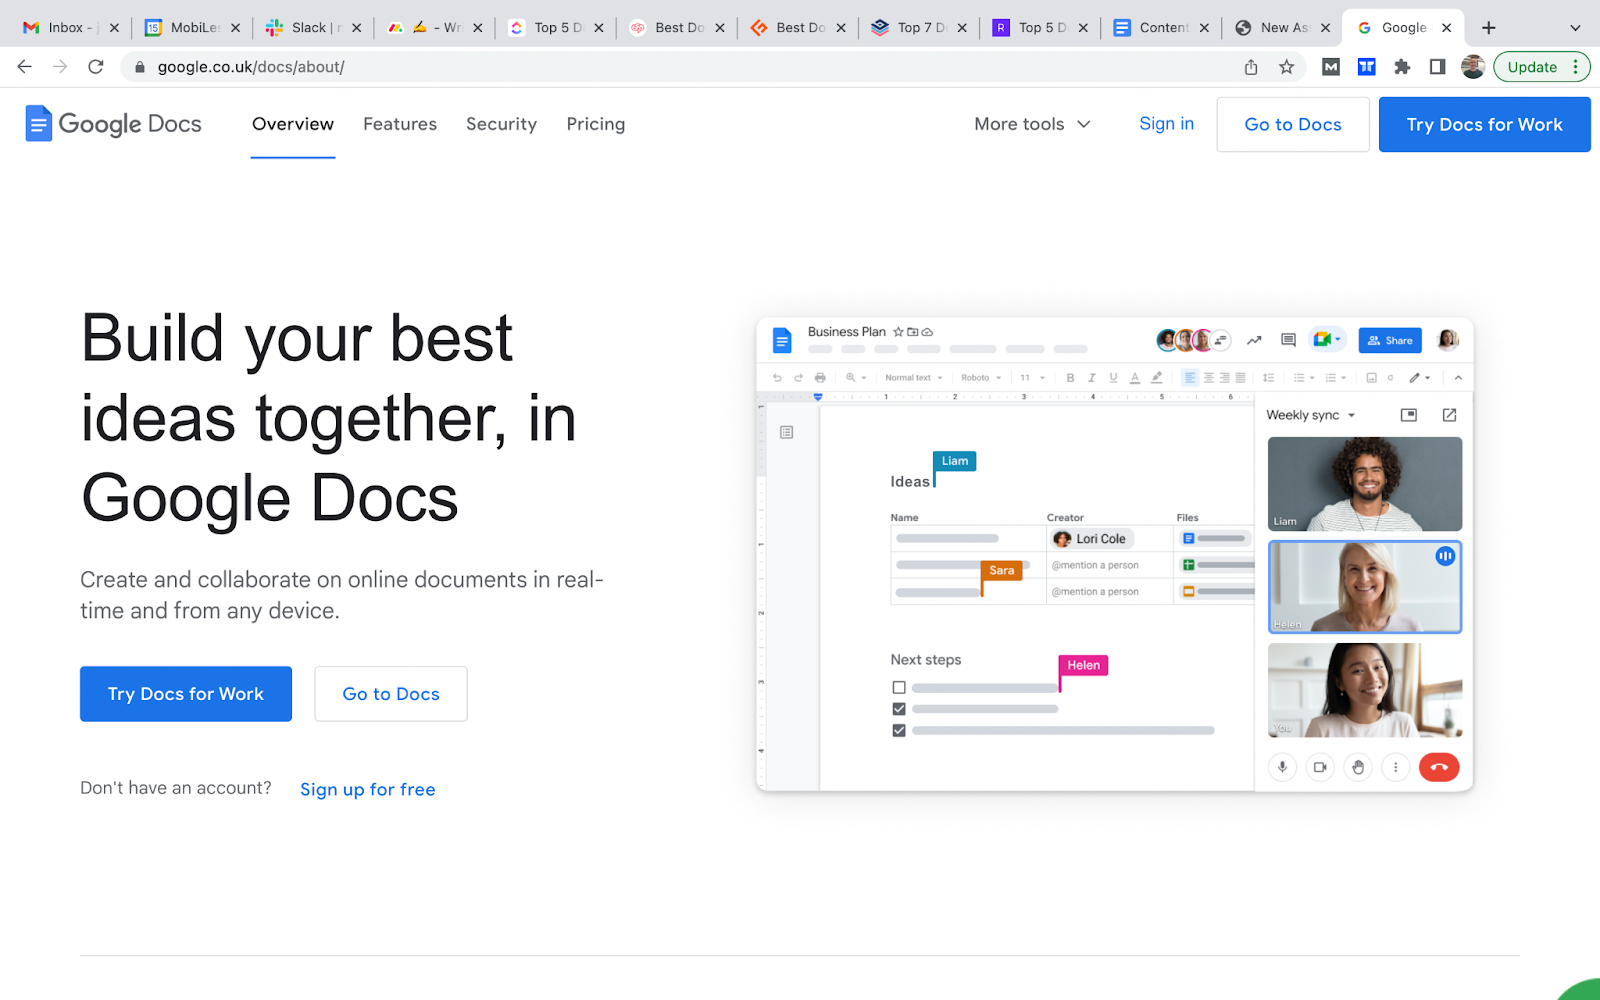 googledocs document collaboration software home page